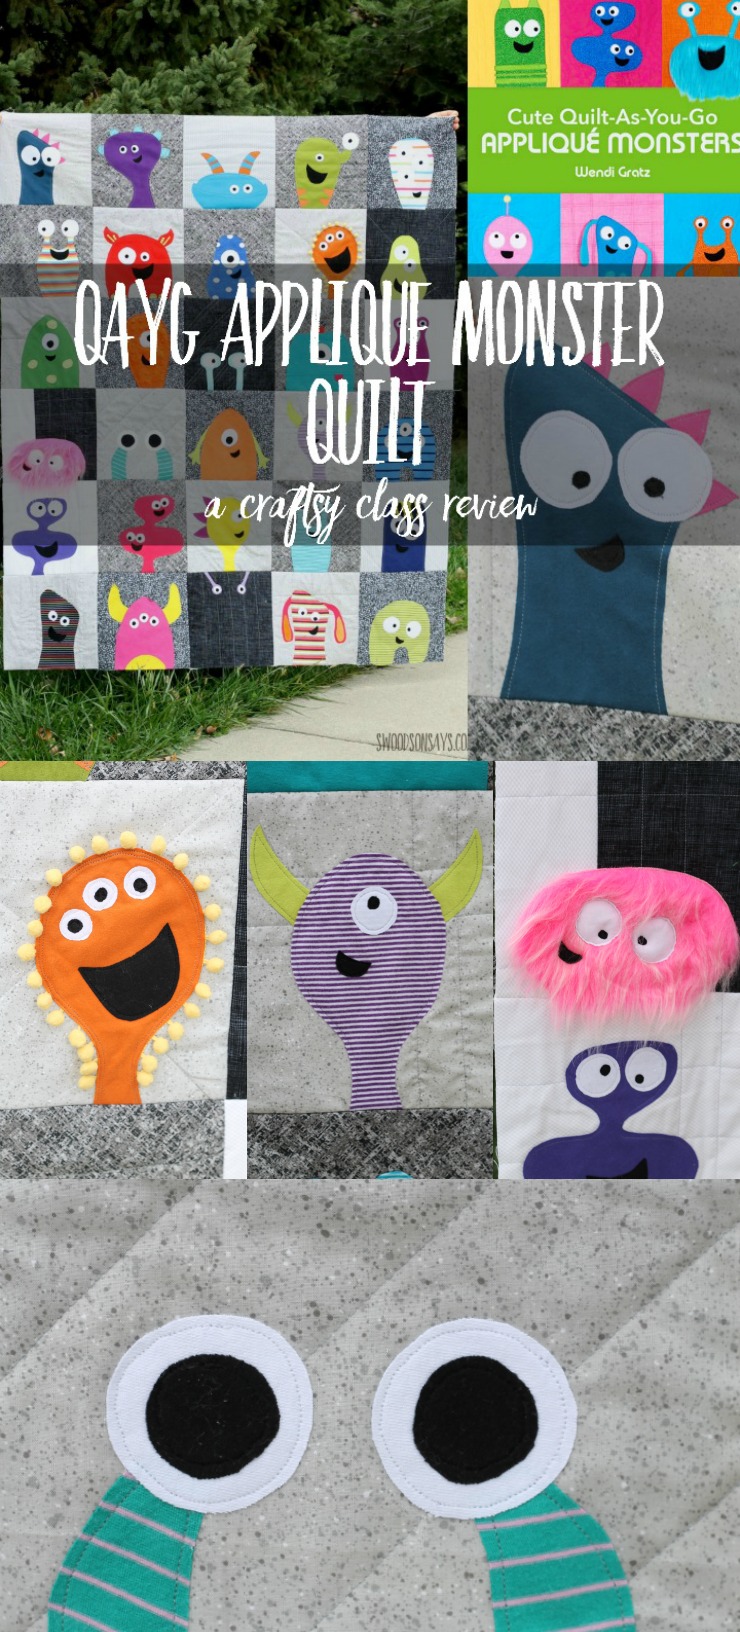 Beginner friendly quilt alert! This is a fun and easy Craftsy class that I'm reviewing, to make your own quilt-as-you-go applique monster quilt.